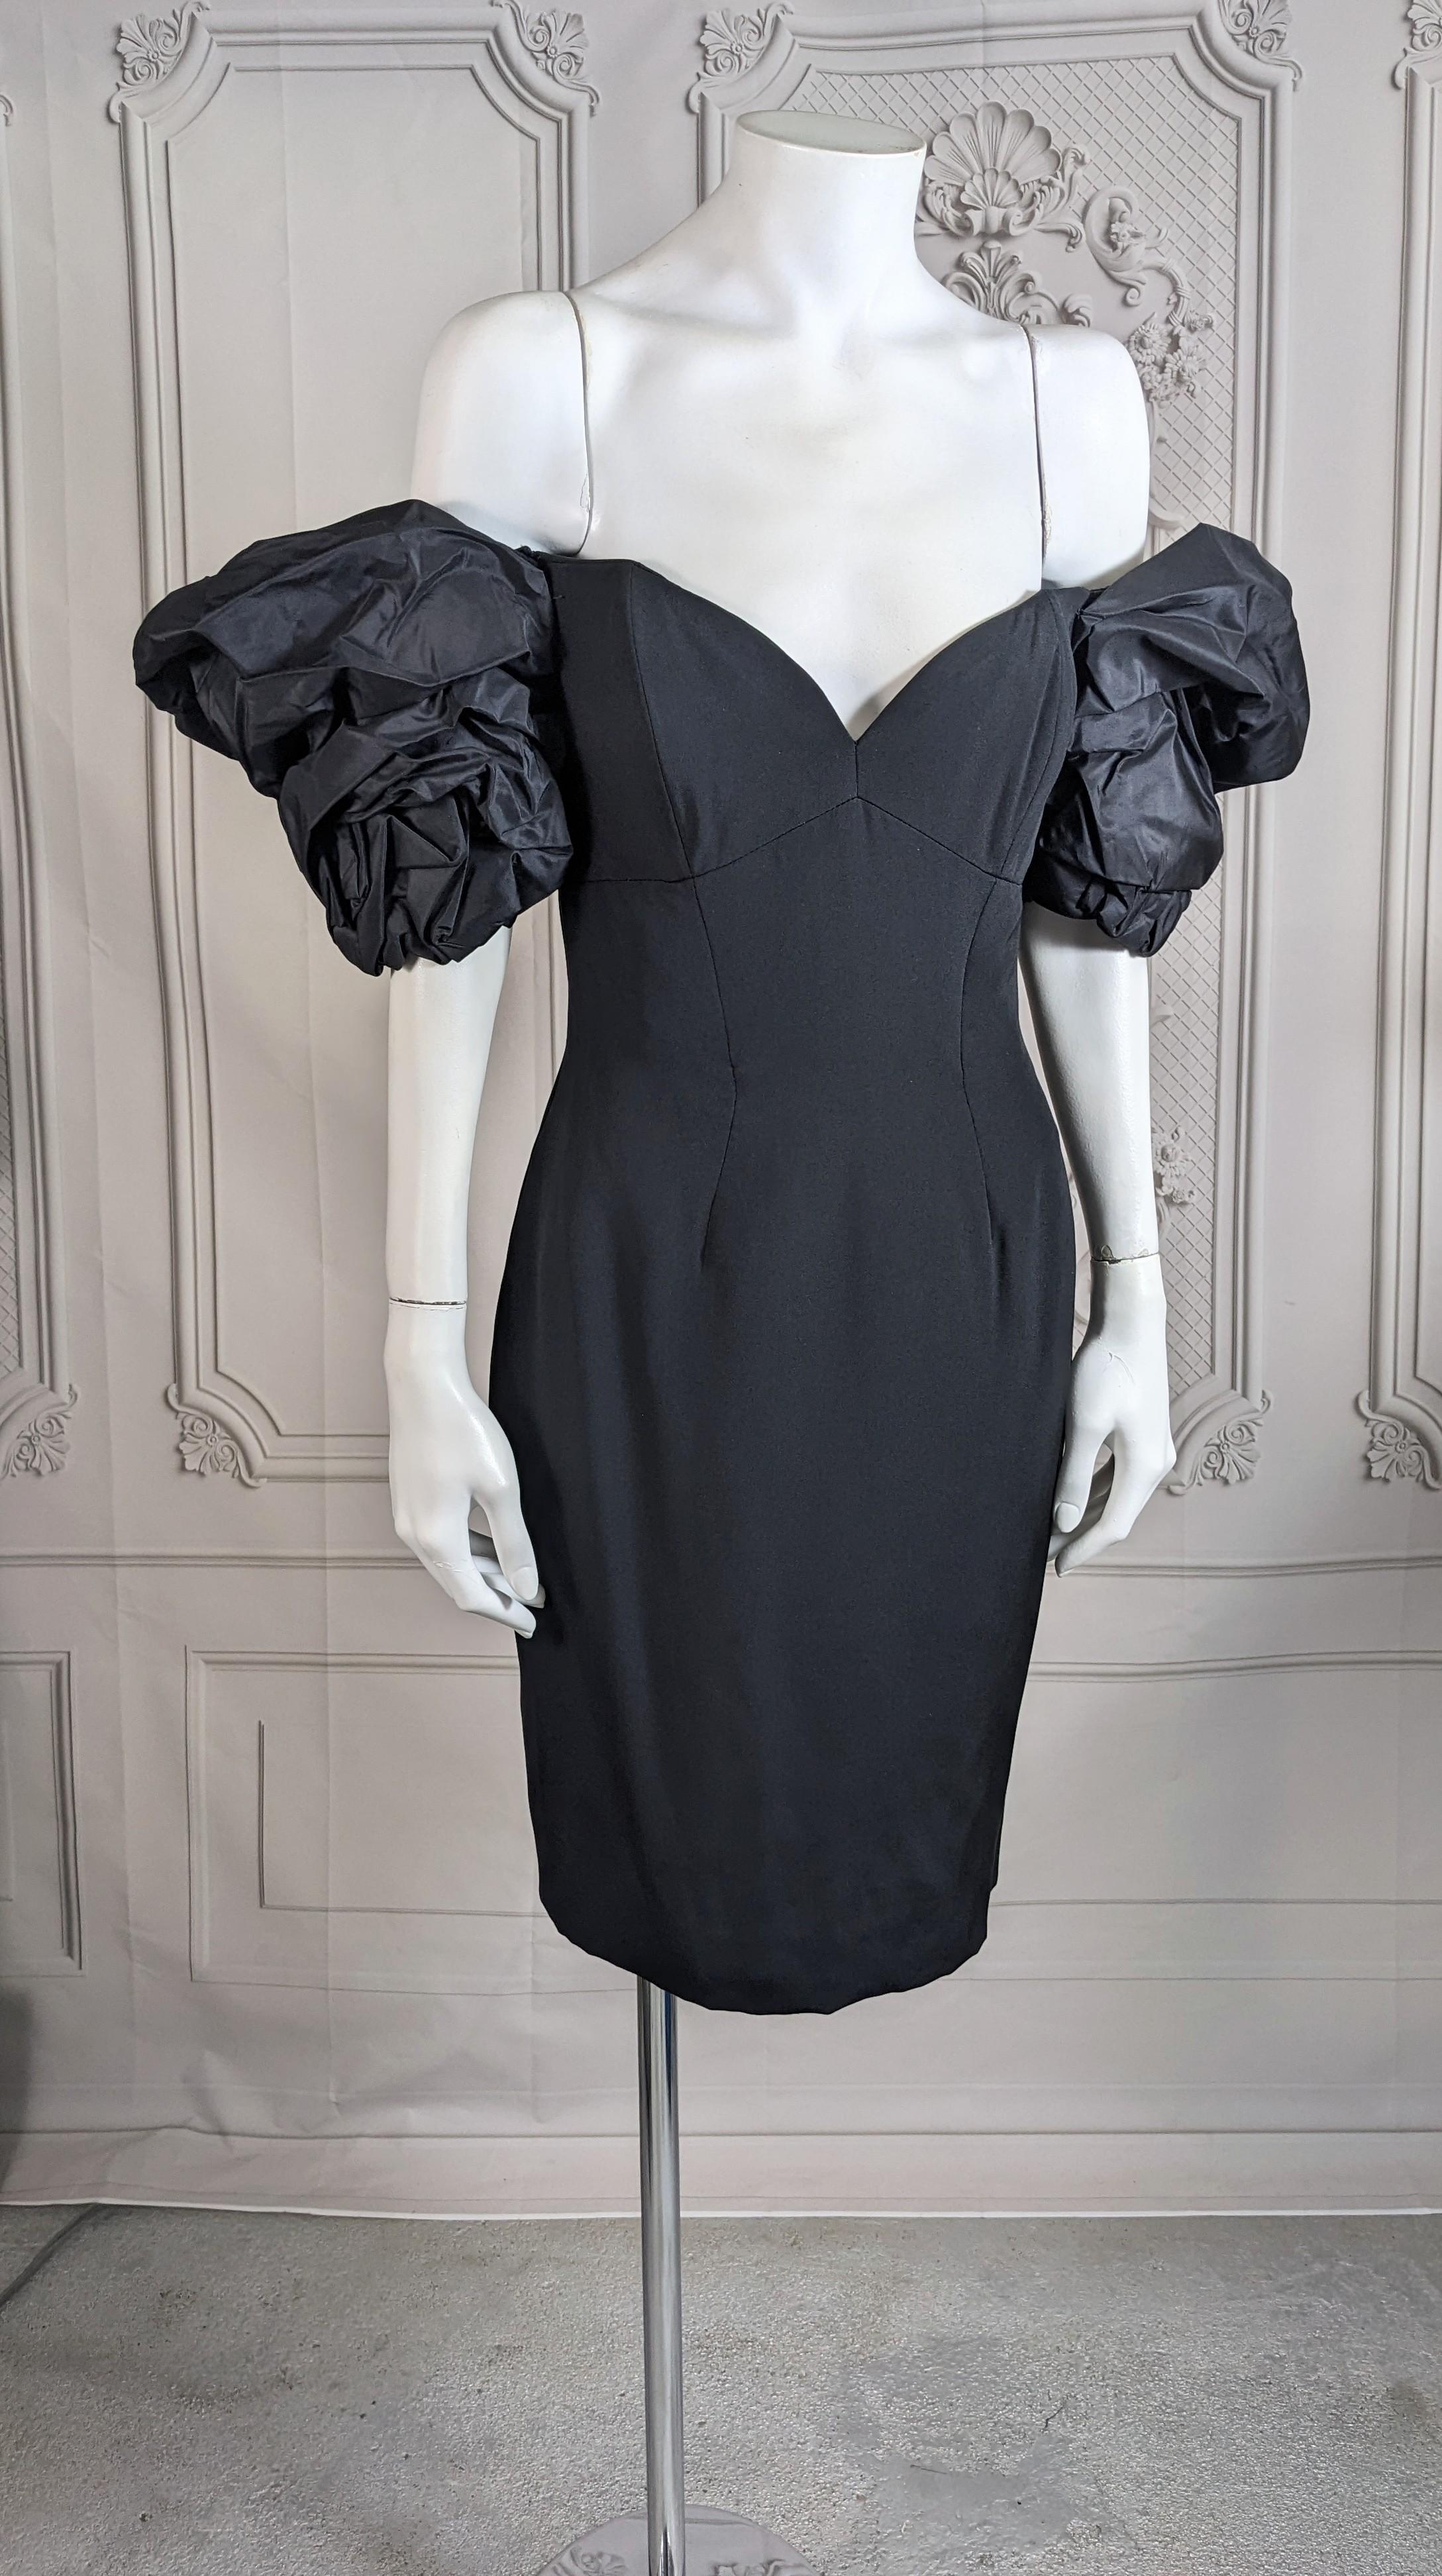 Vicky Tiel, Paris Silk Crepe and Taffeta Strapless Dress from the 1990's. Heavy silk crepe with paper silk taffeta ruched, exaggerated puff sleeves. Interior boning, simple and elegant. 1990's France. Size 40.